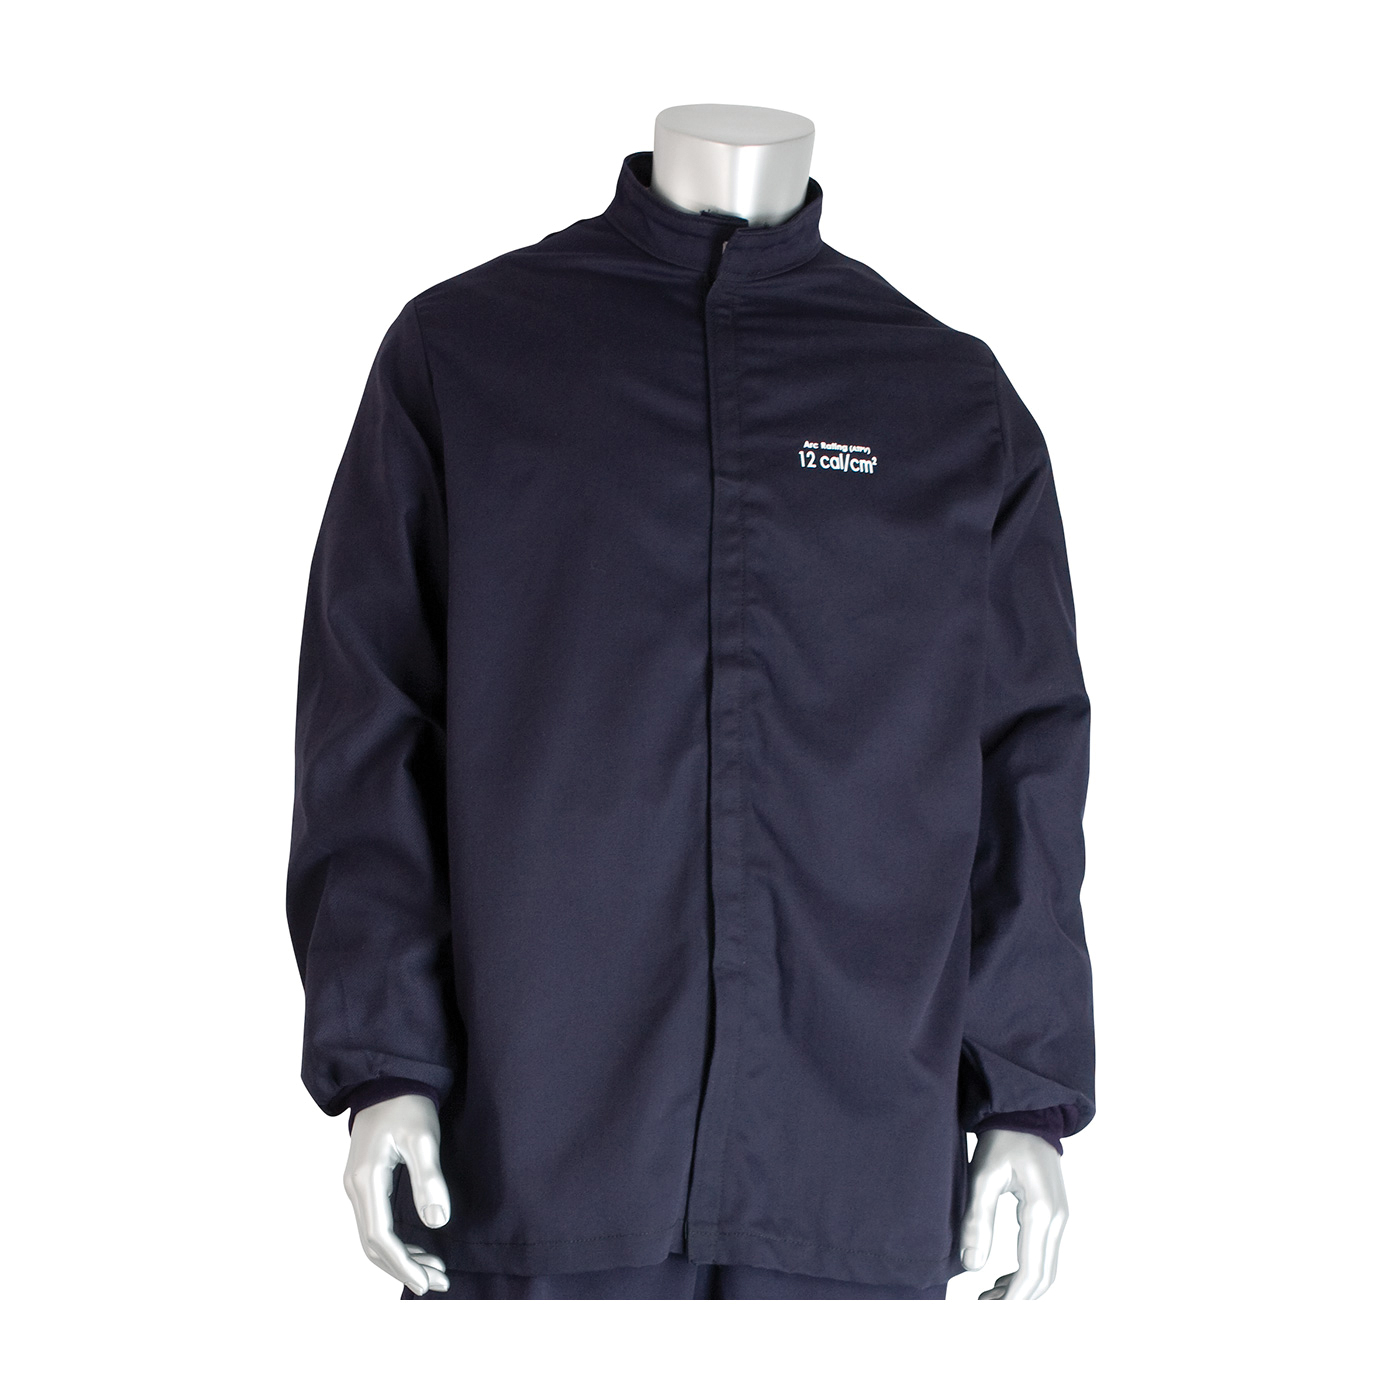 PIP® 9100-21782/S Arc and Flame Resistant Jacket, S, Navy, Westex® UltraSoft® 88% Cotton 12% High Tenacity Nylon, 36 to 38 in Chest, Resists: Arc and Flame, ASTM F1506-10a, ASTM F2178-12